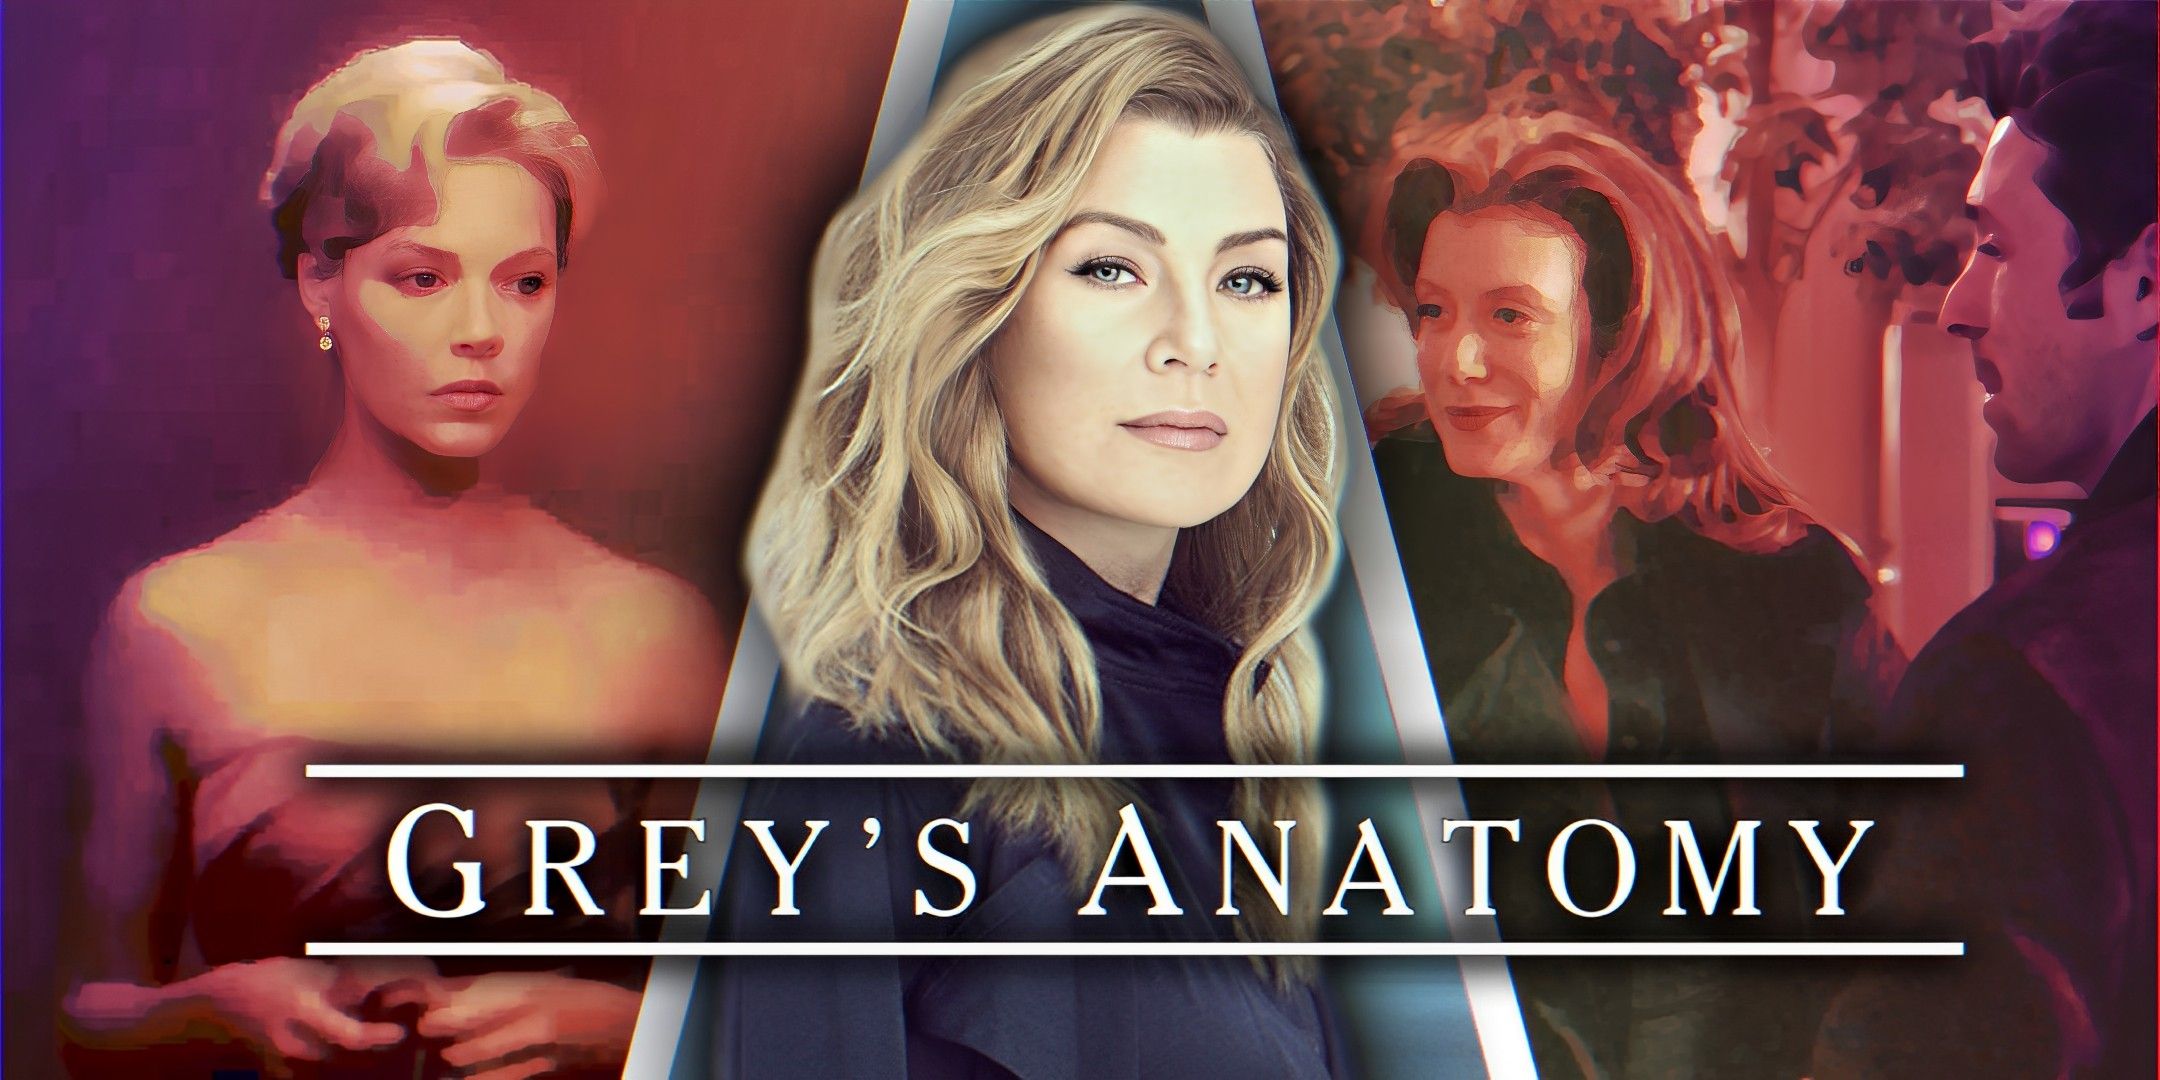 Meredith Grey and the Grey’s Anatomy end logo with stills of Izzie Stevens and Addison Montgomery.